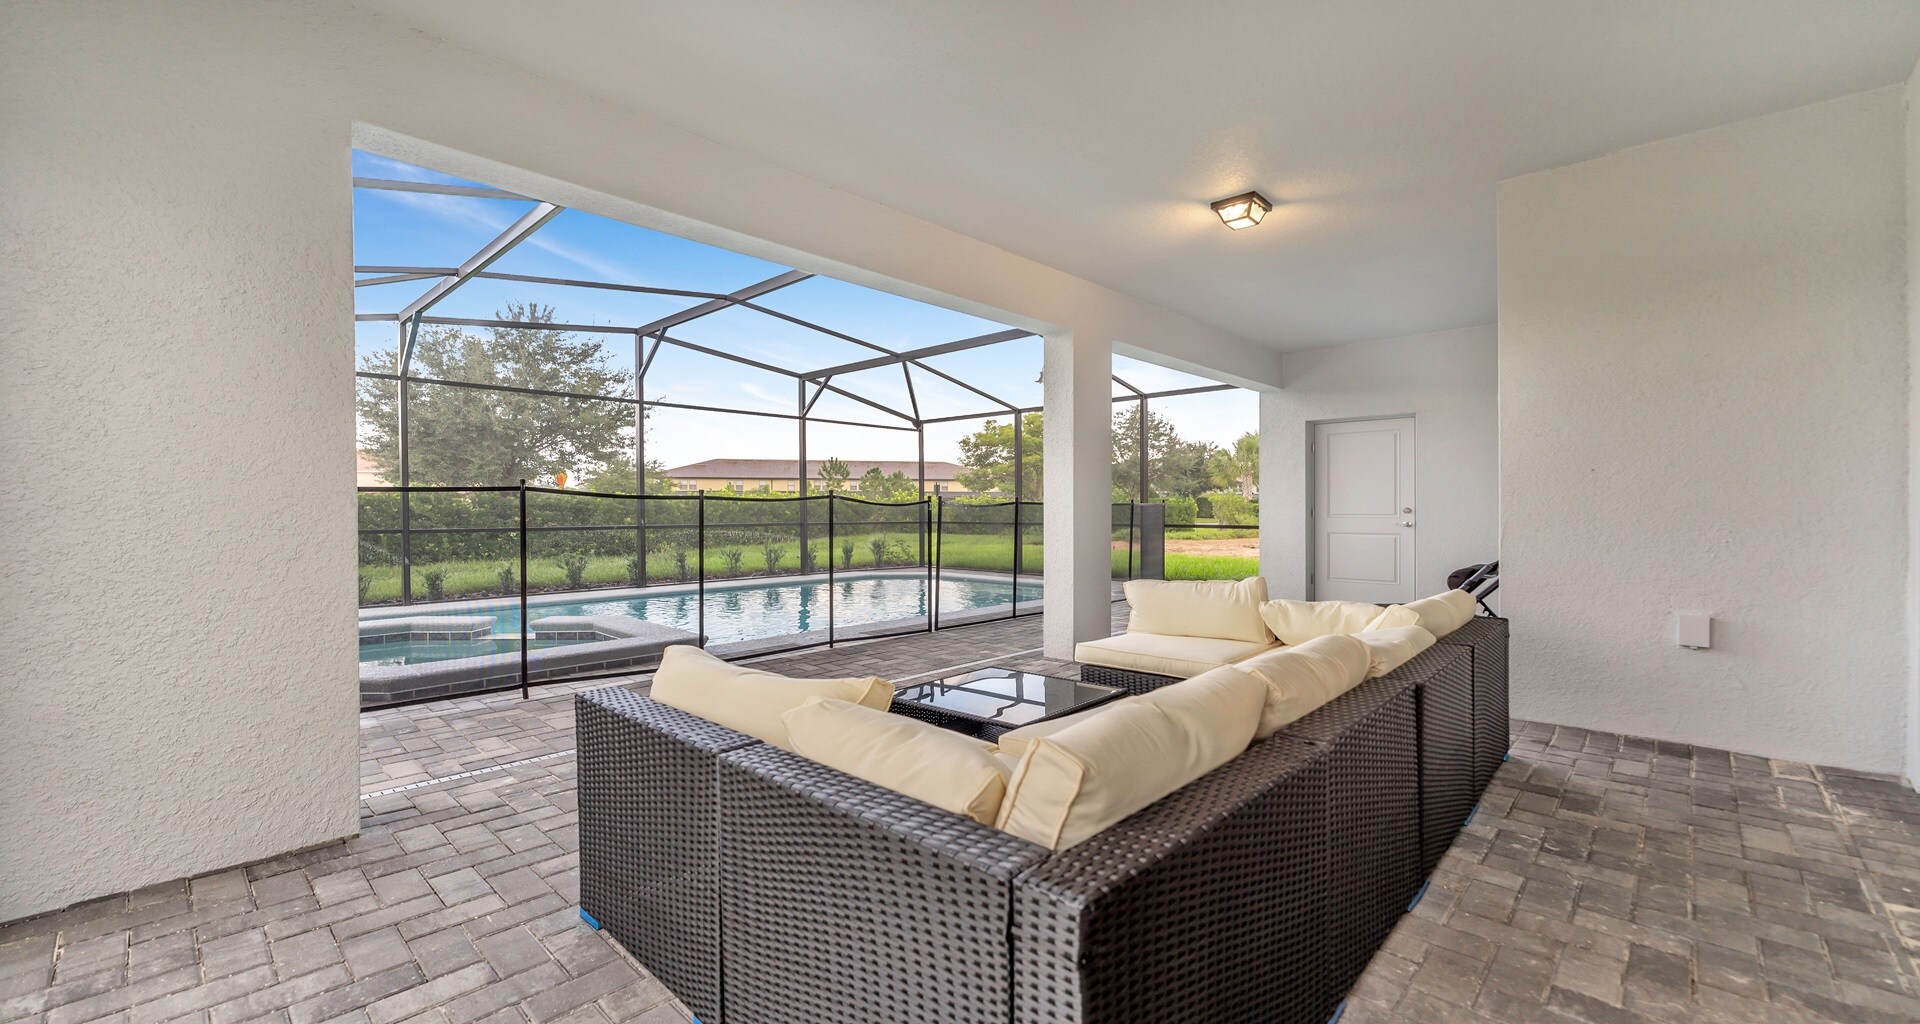 Comfortable seating captivating the view of the outdoor pool, creating a relaxing and scenic spot.